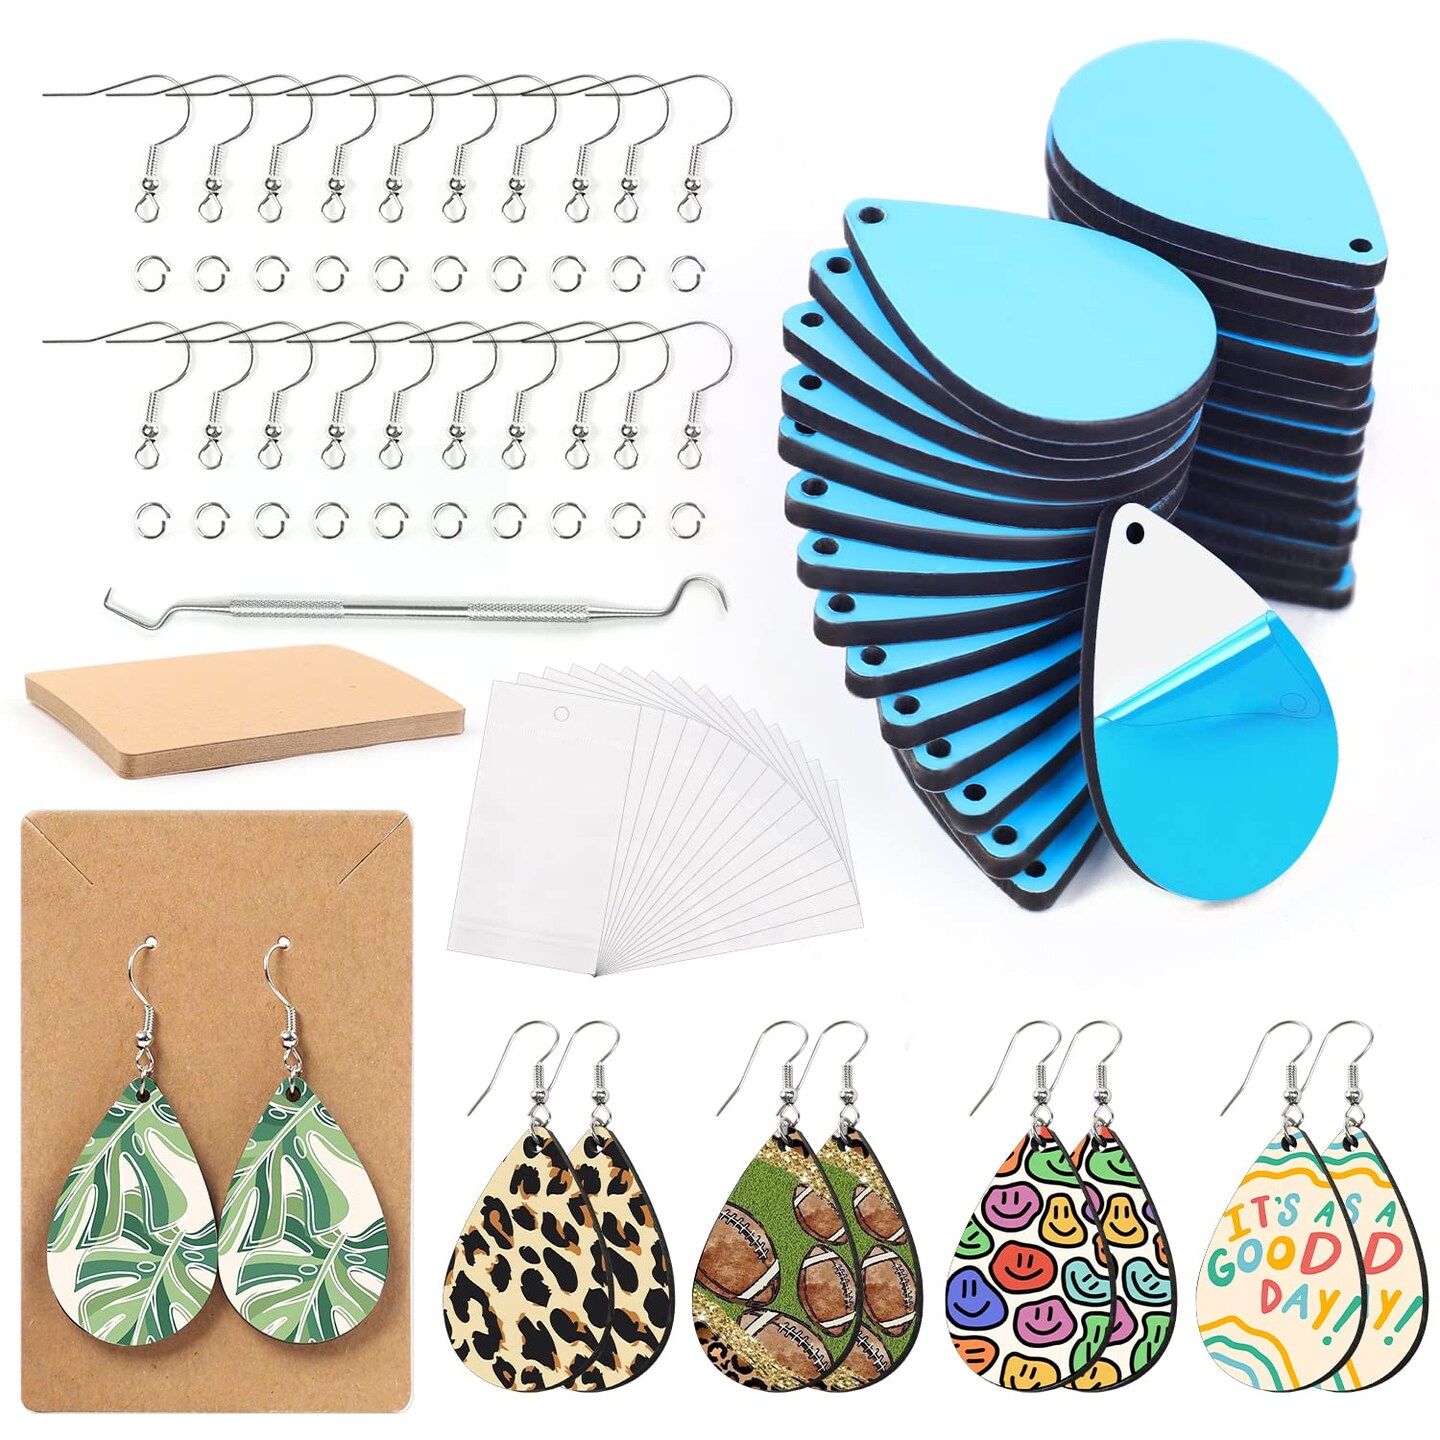 Wholesale MDF Sublimation Earring Blanks with Earring Hooks Jump